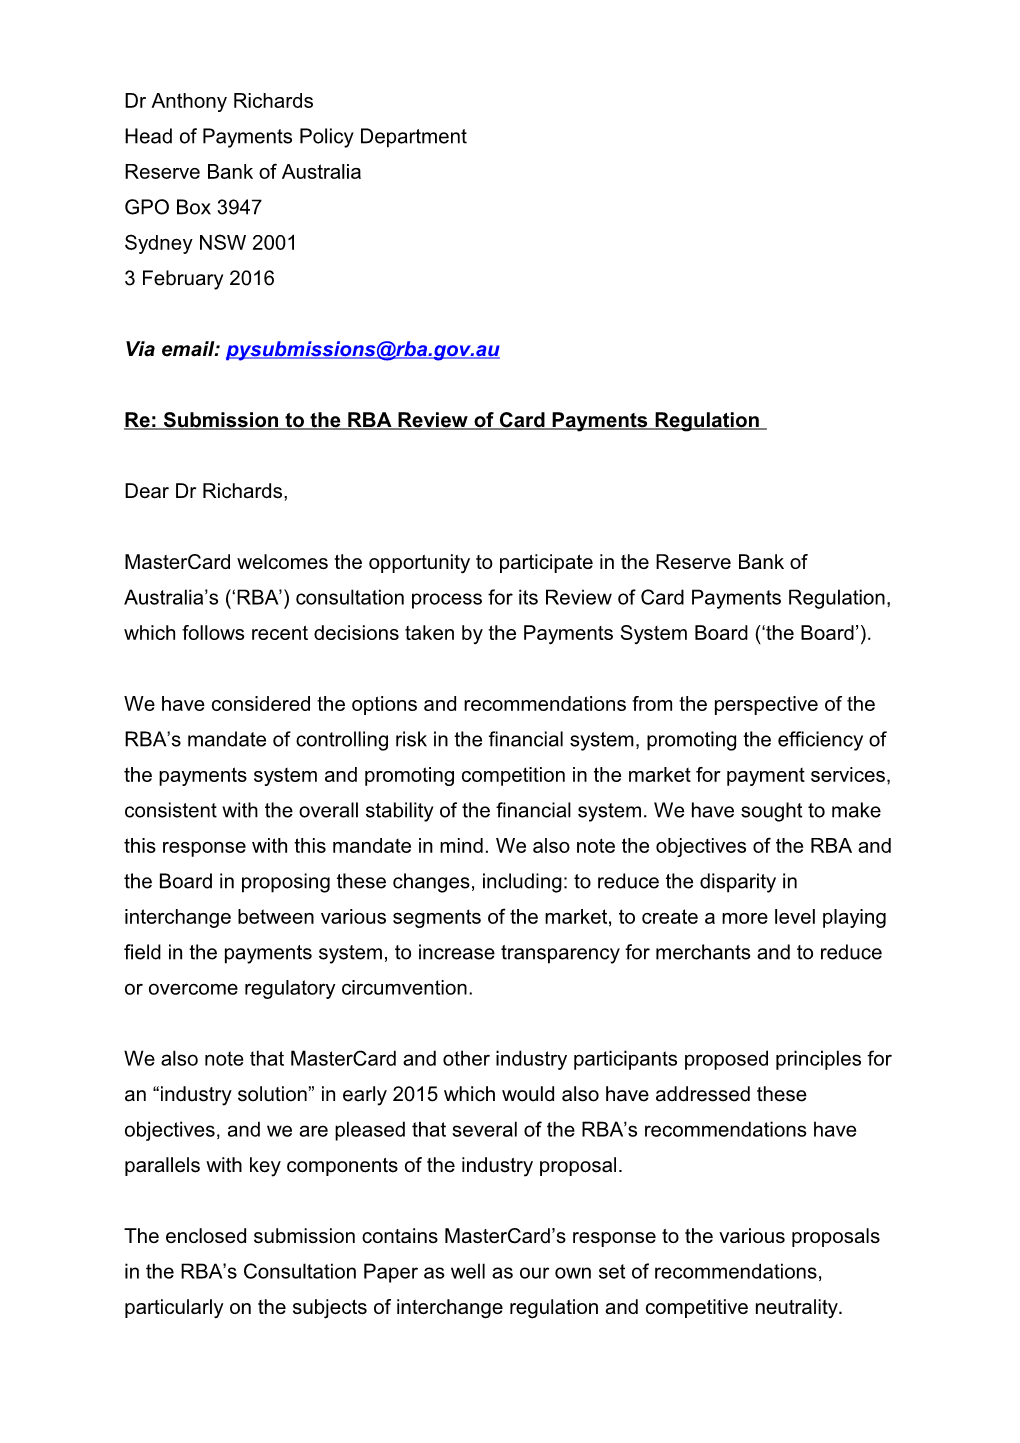 Re: Submission to the RBA Review of Card Payments Regulation